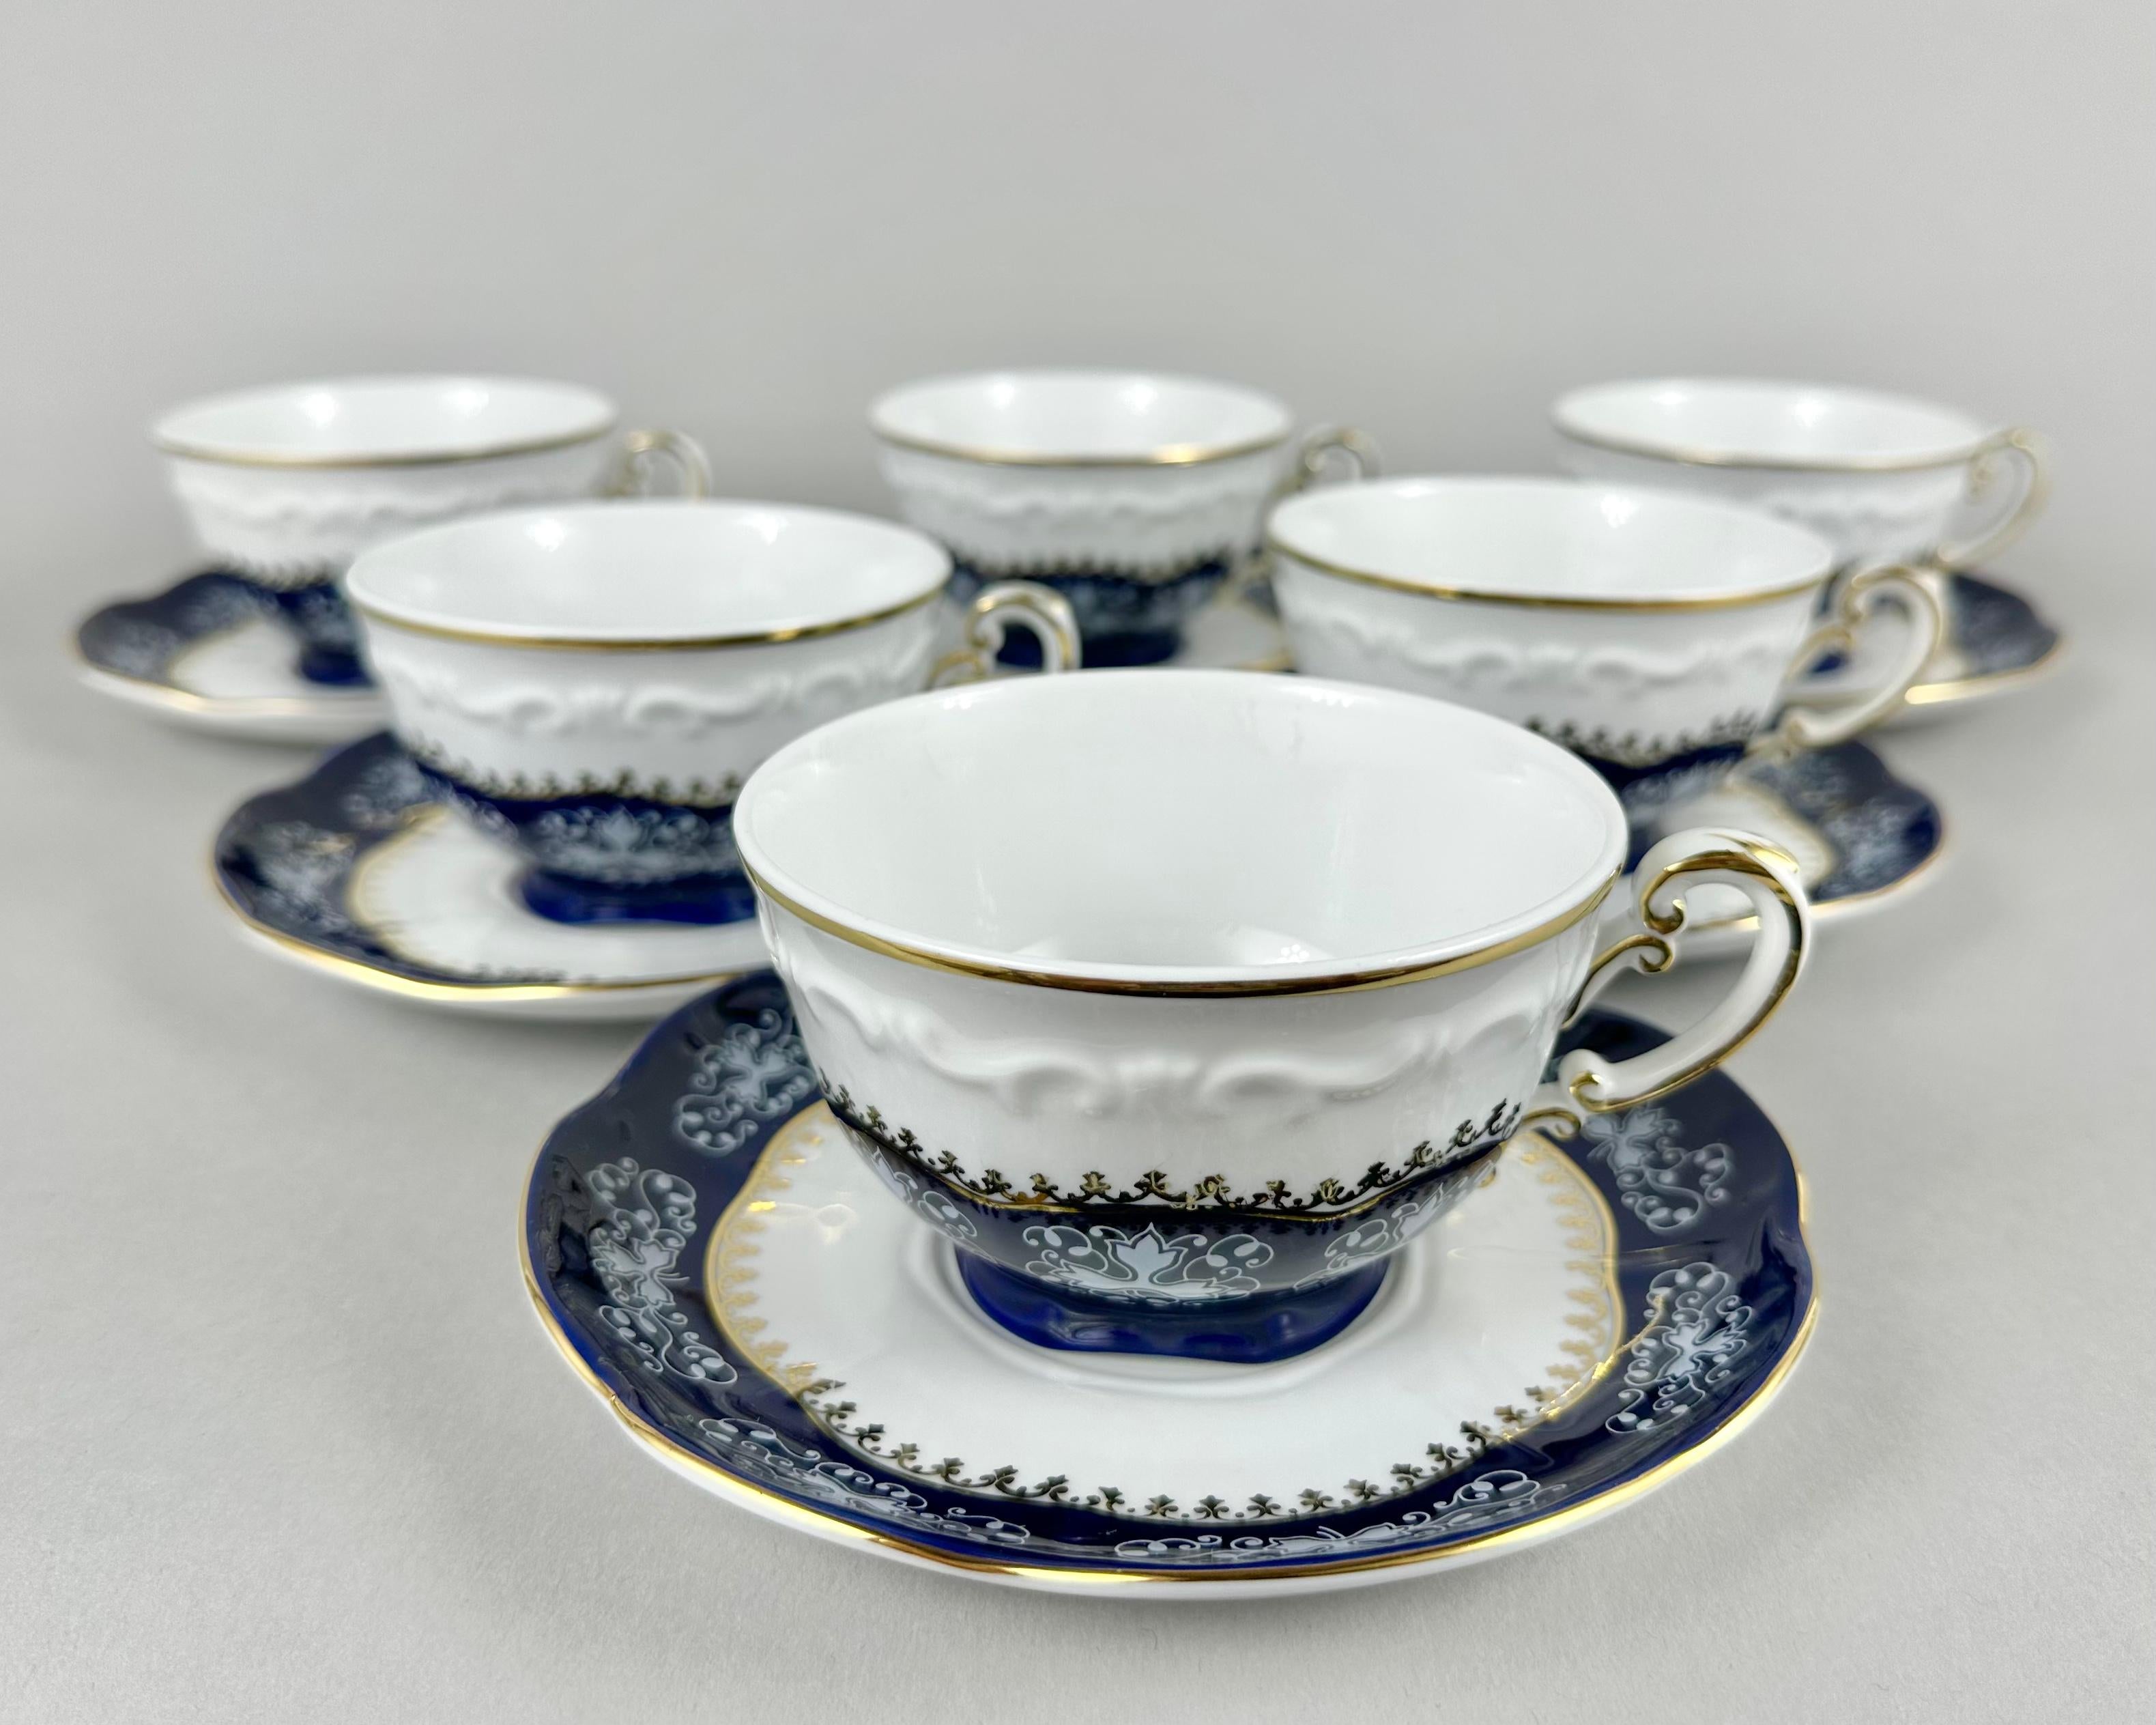 Vintage porcelain coffee or tea service set by Zsolney Manufacturer, Hungary, 1960s.

It consists of 15 pieces in a white colored porcelain with cobalt blue and gold patterns and rims.

Zsolnay creates handpainted porcelain in Pécs, Hungary.

On the